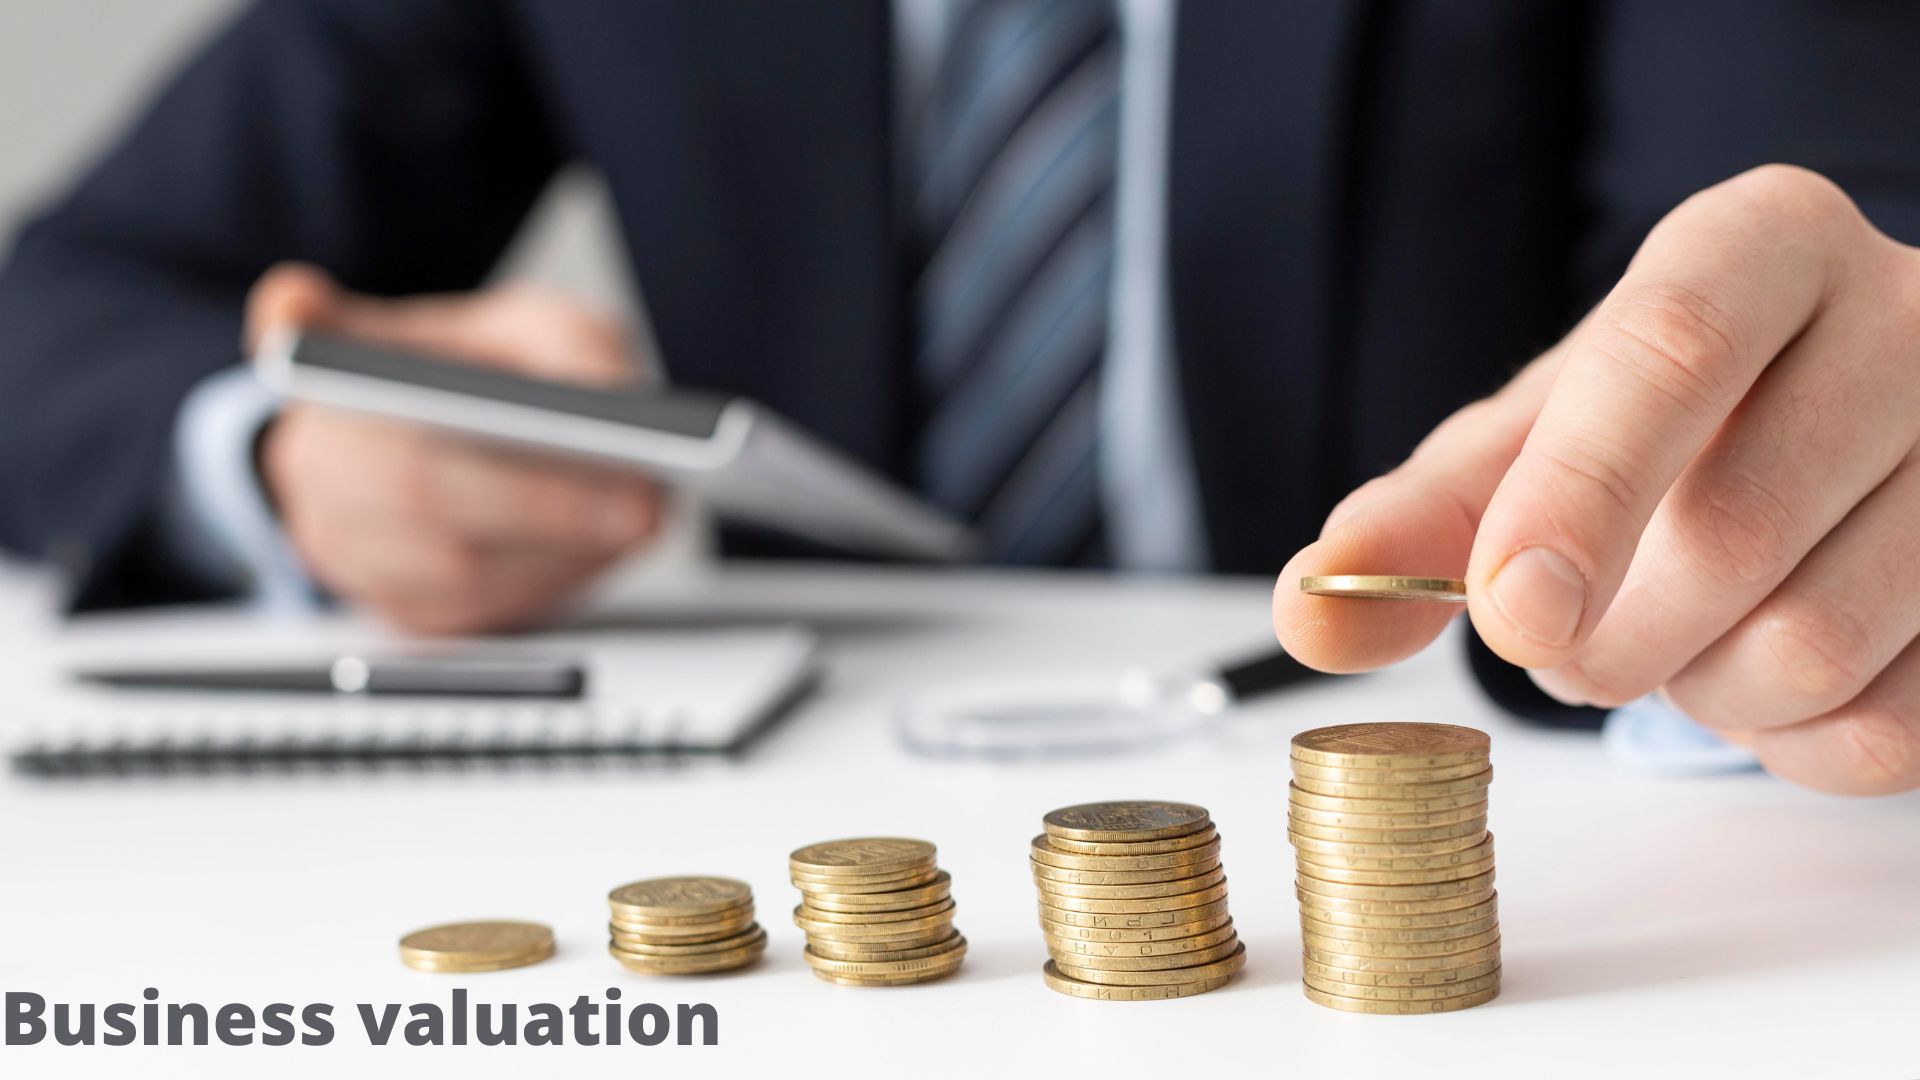 Business Valuation Based on Revenue Explained: What You Need to Know